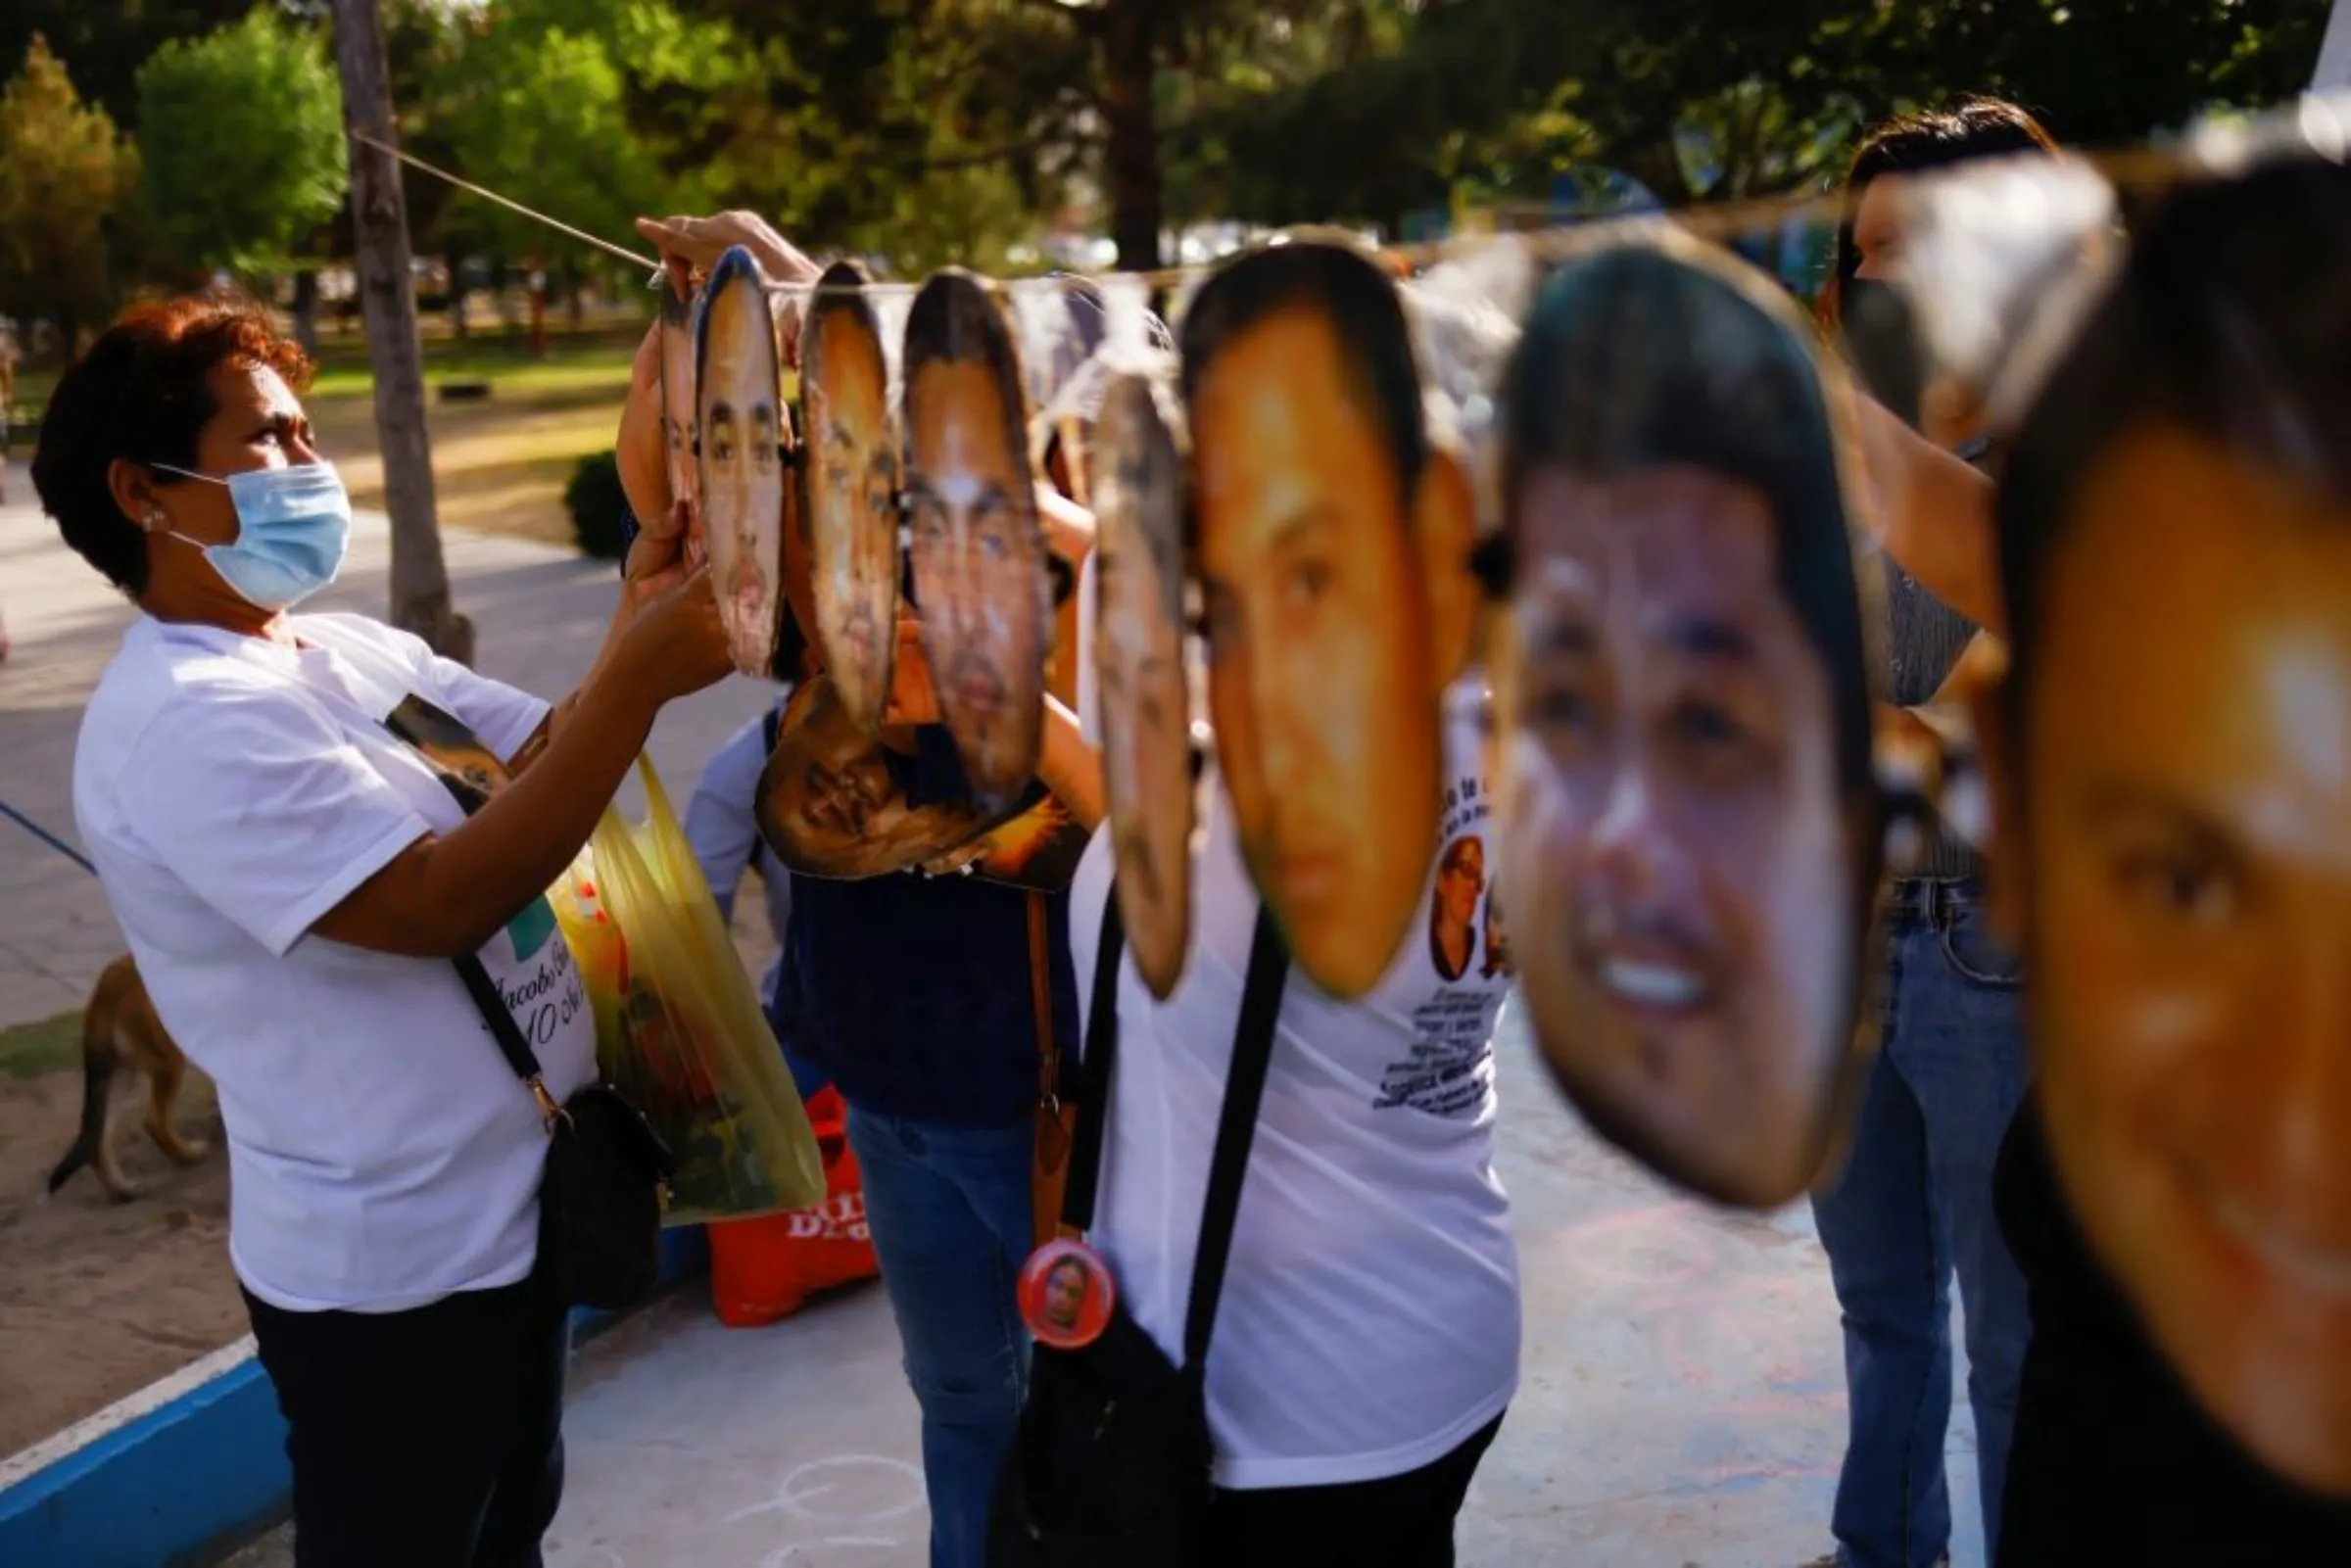 Mothers places impressions of the faces of missing persons during a protest ahead of Mother's Day in Ciudad Juarez, Mexico May 8, 2022